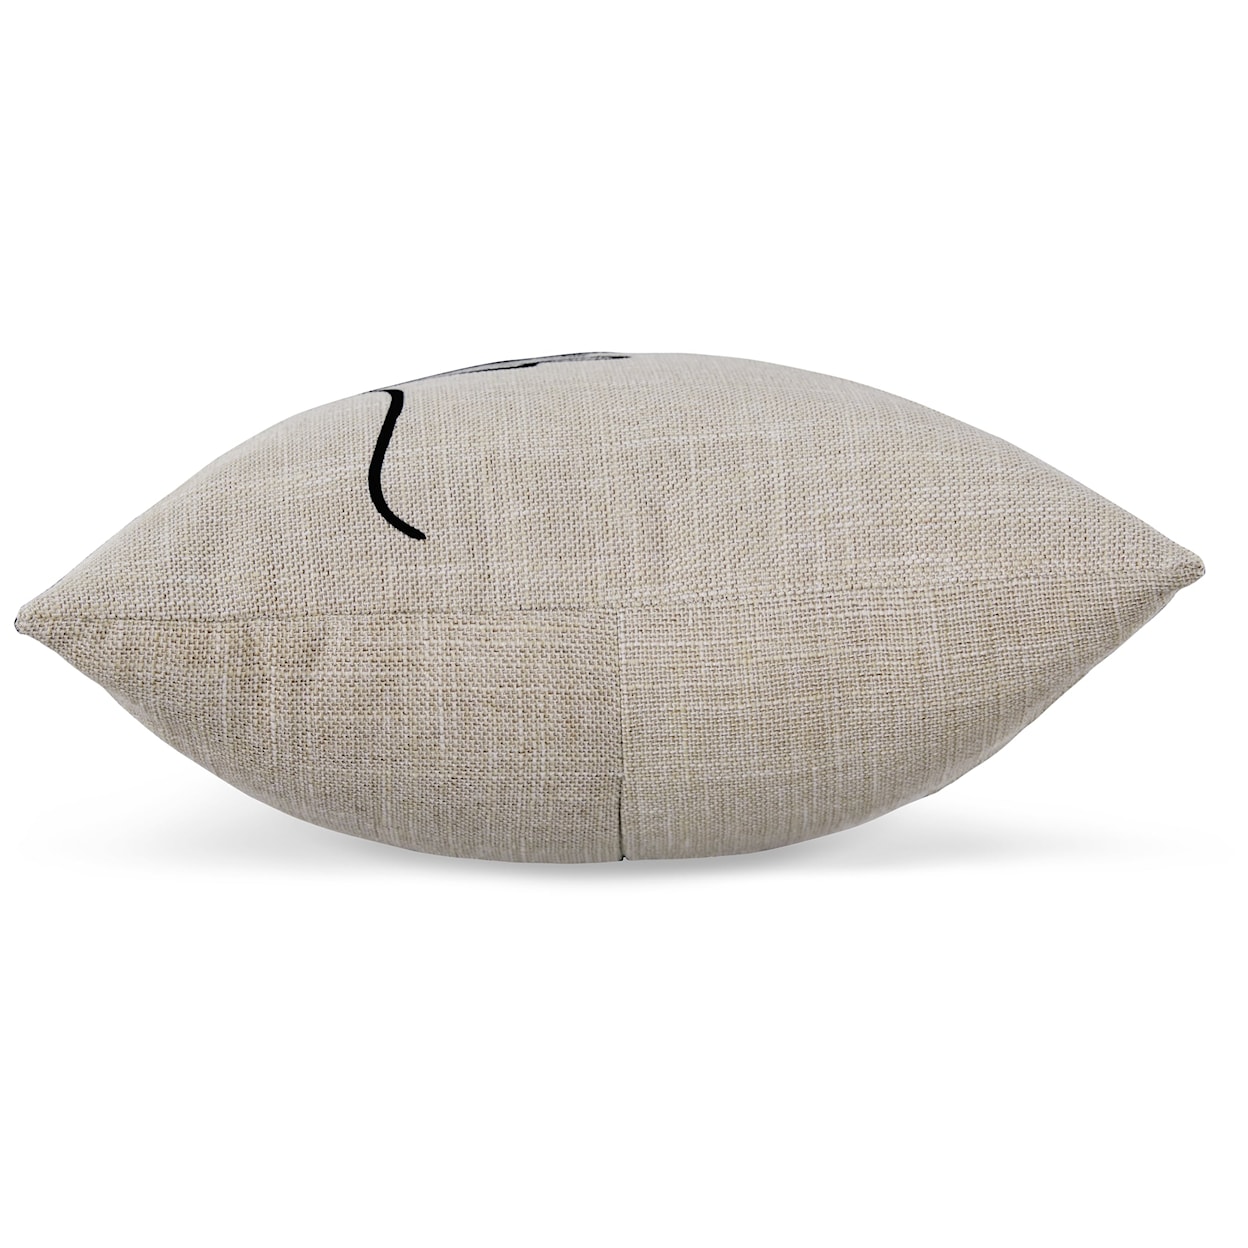 Benchcraft Whisperich Pillow (Set of 4)